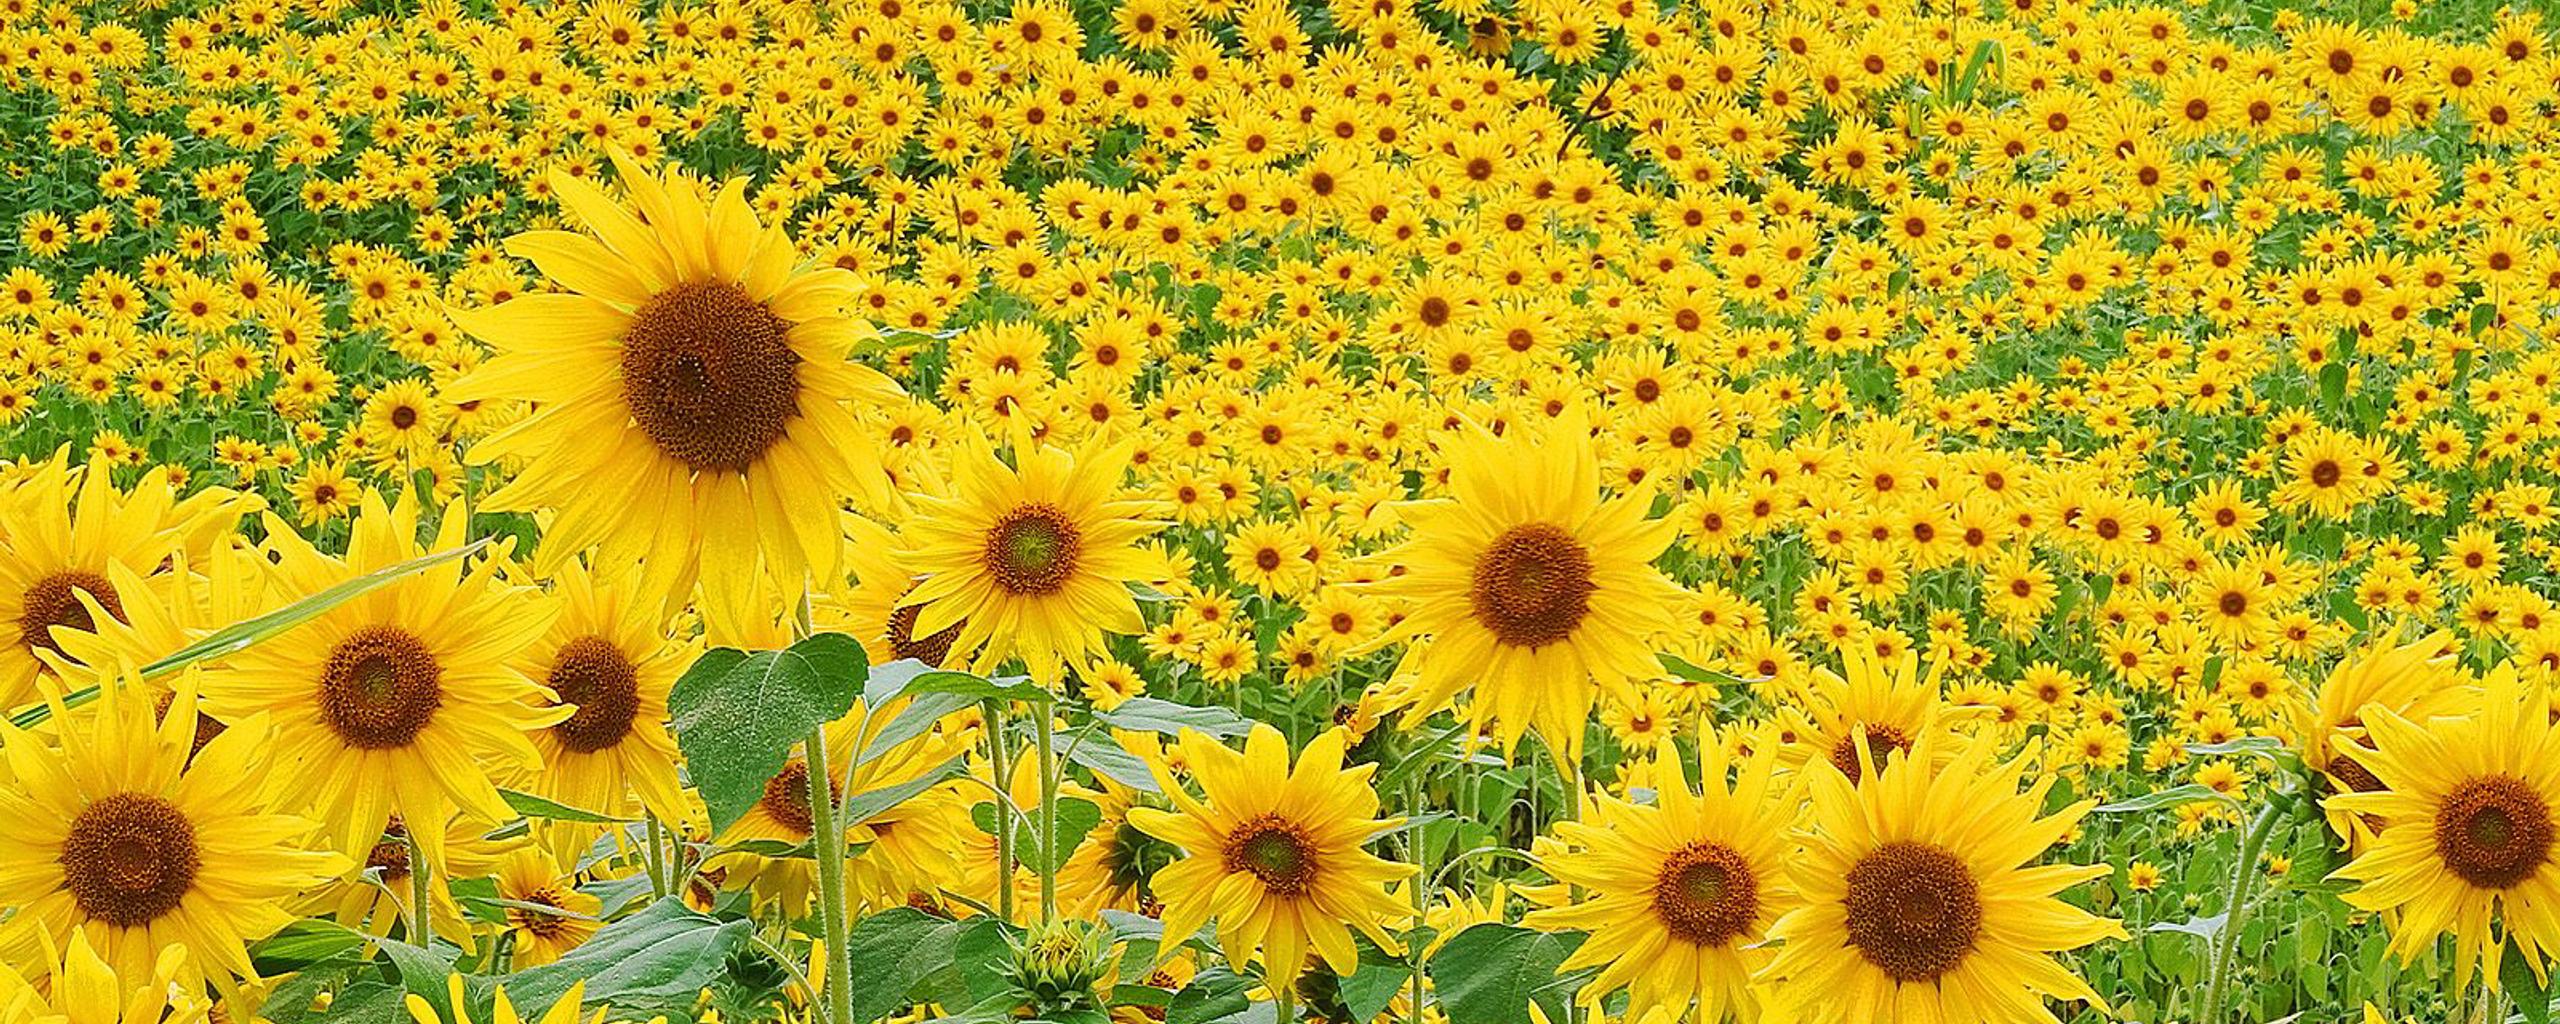 Download Field full of sunflowers Dual 1280x1024.